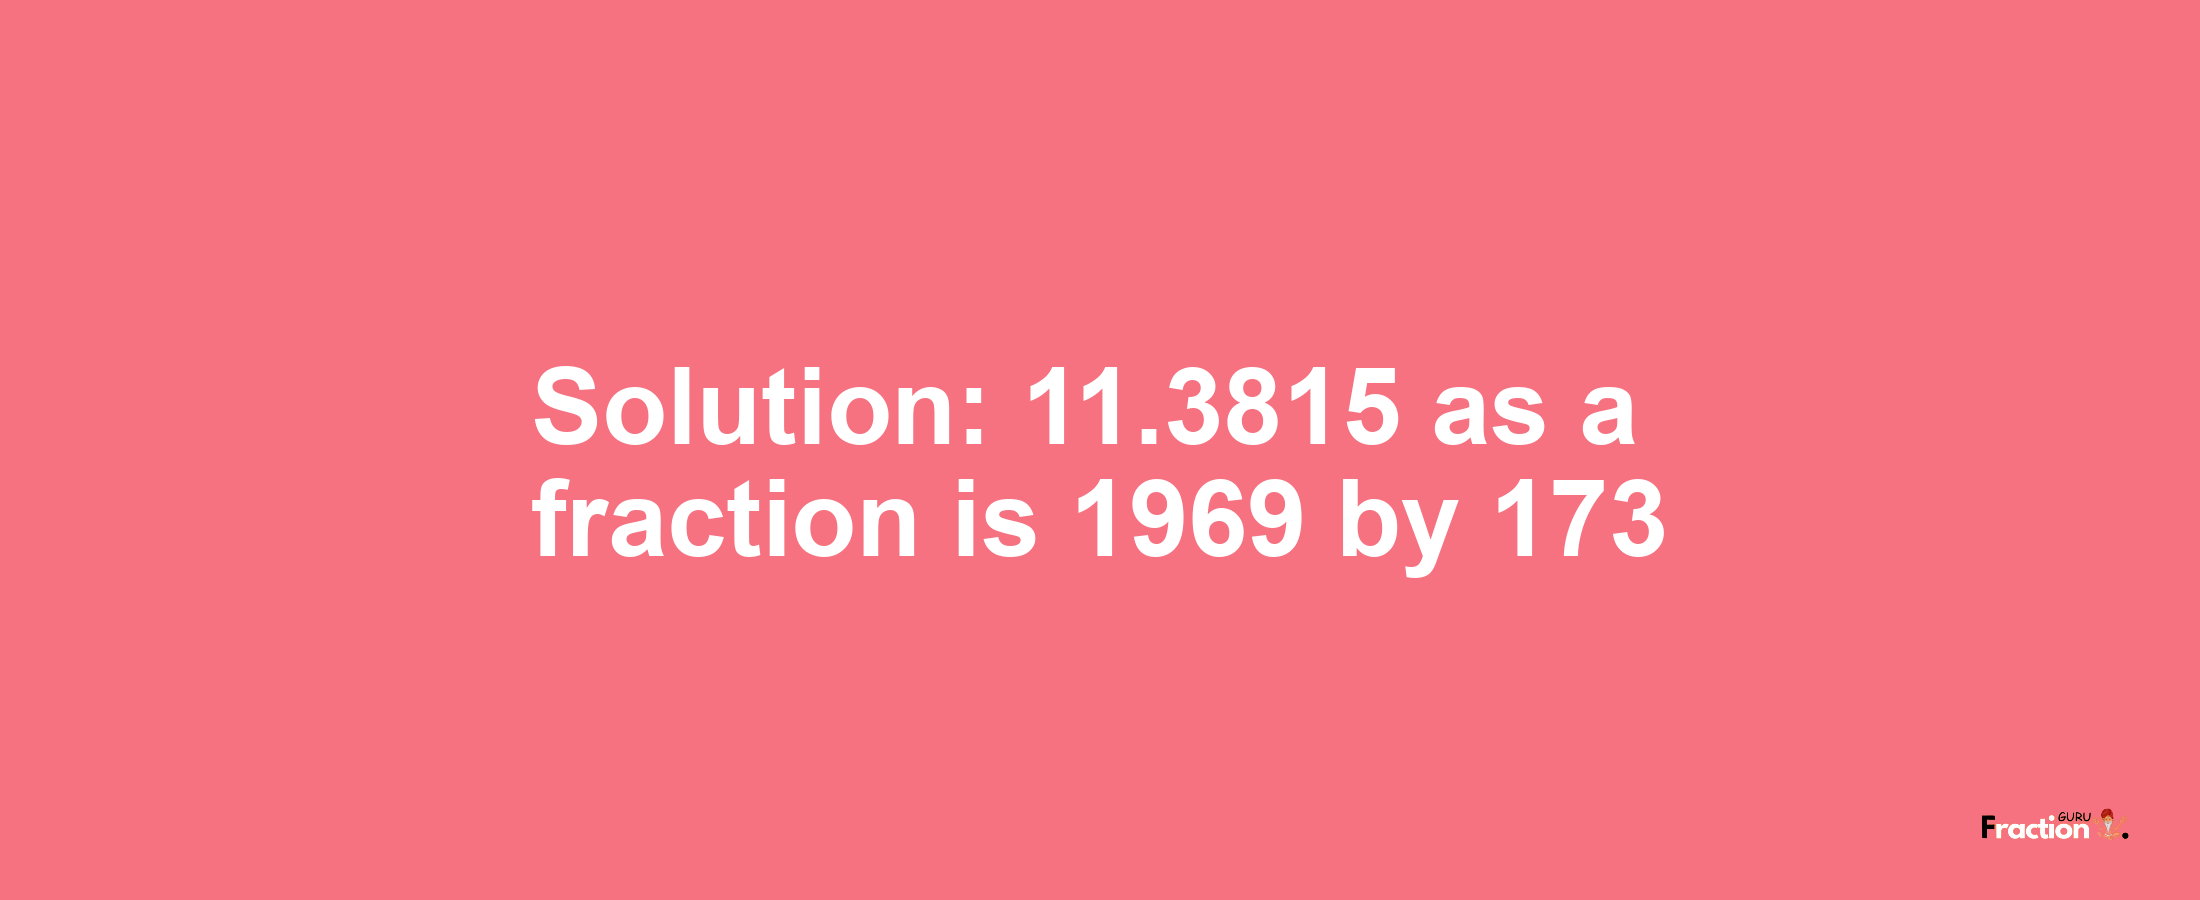 Solution:11.3815 as a fraction is 1969/173